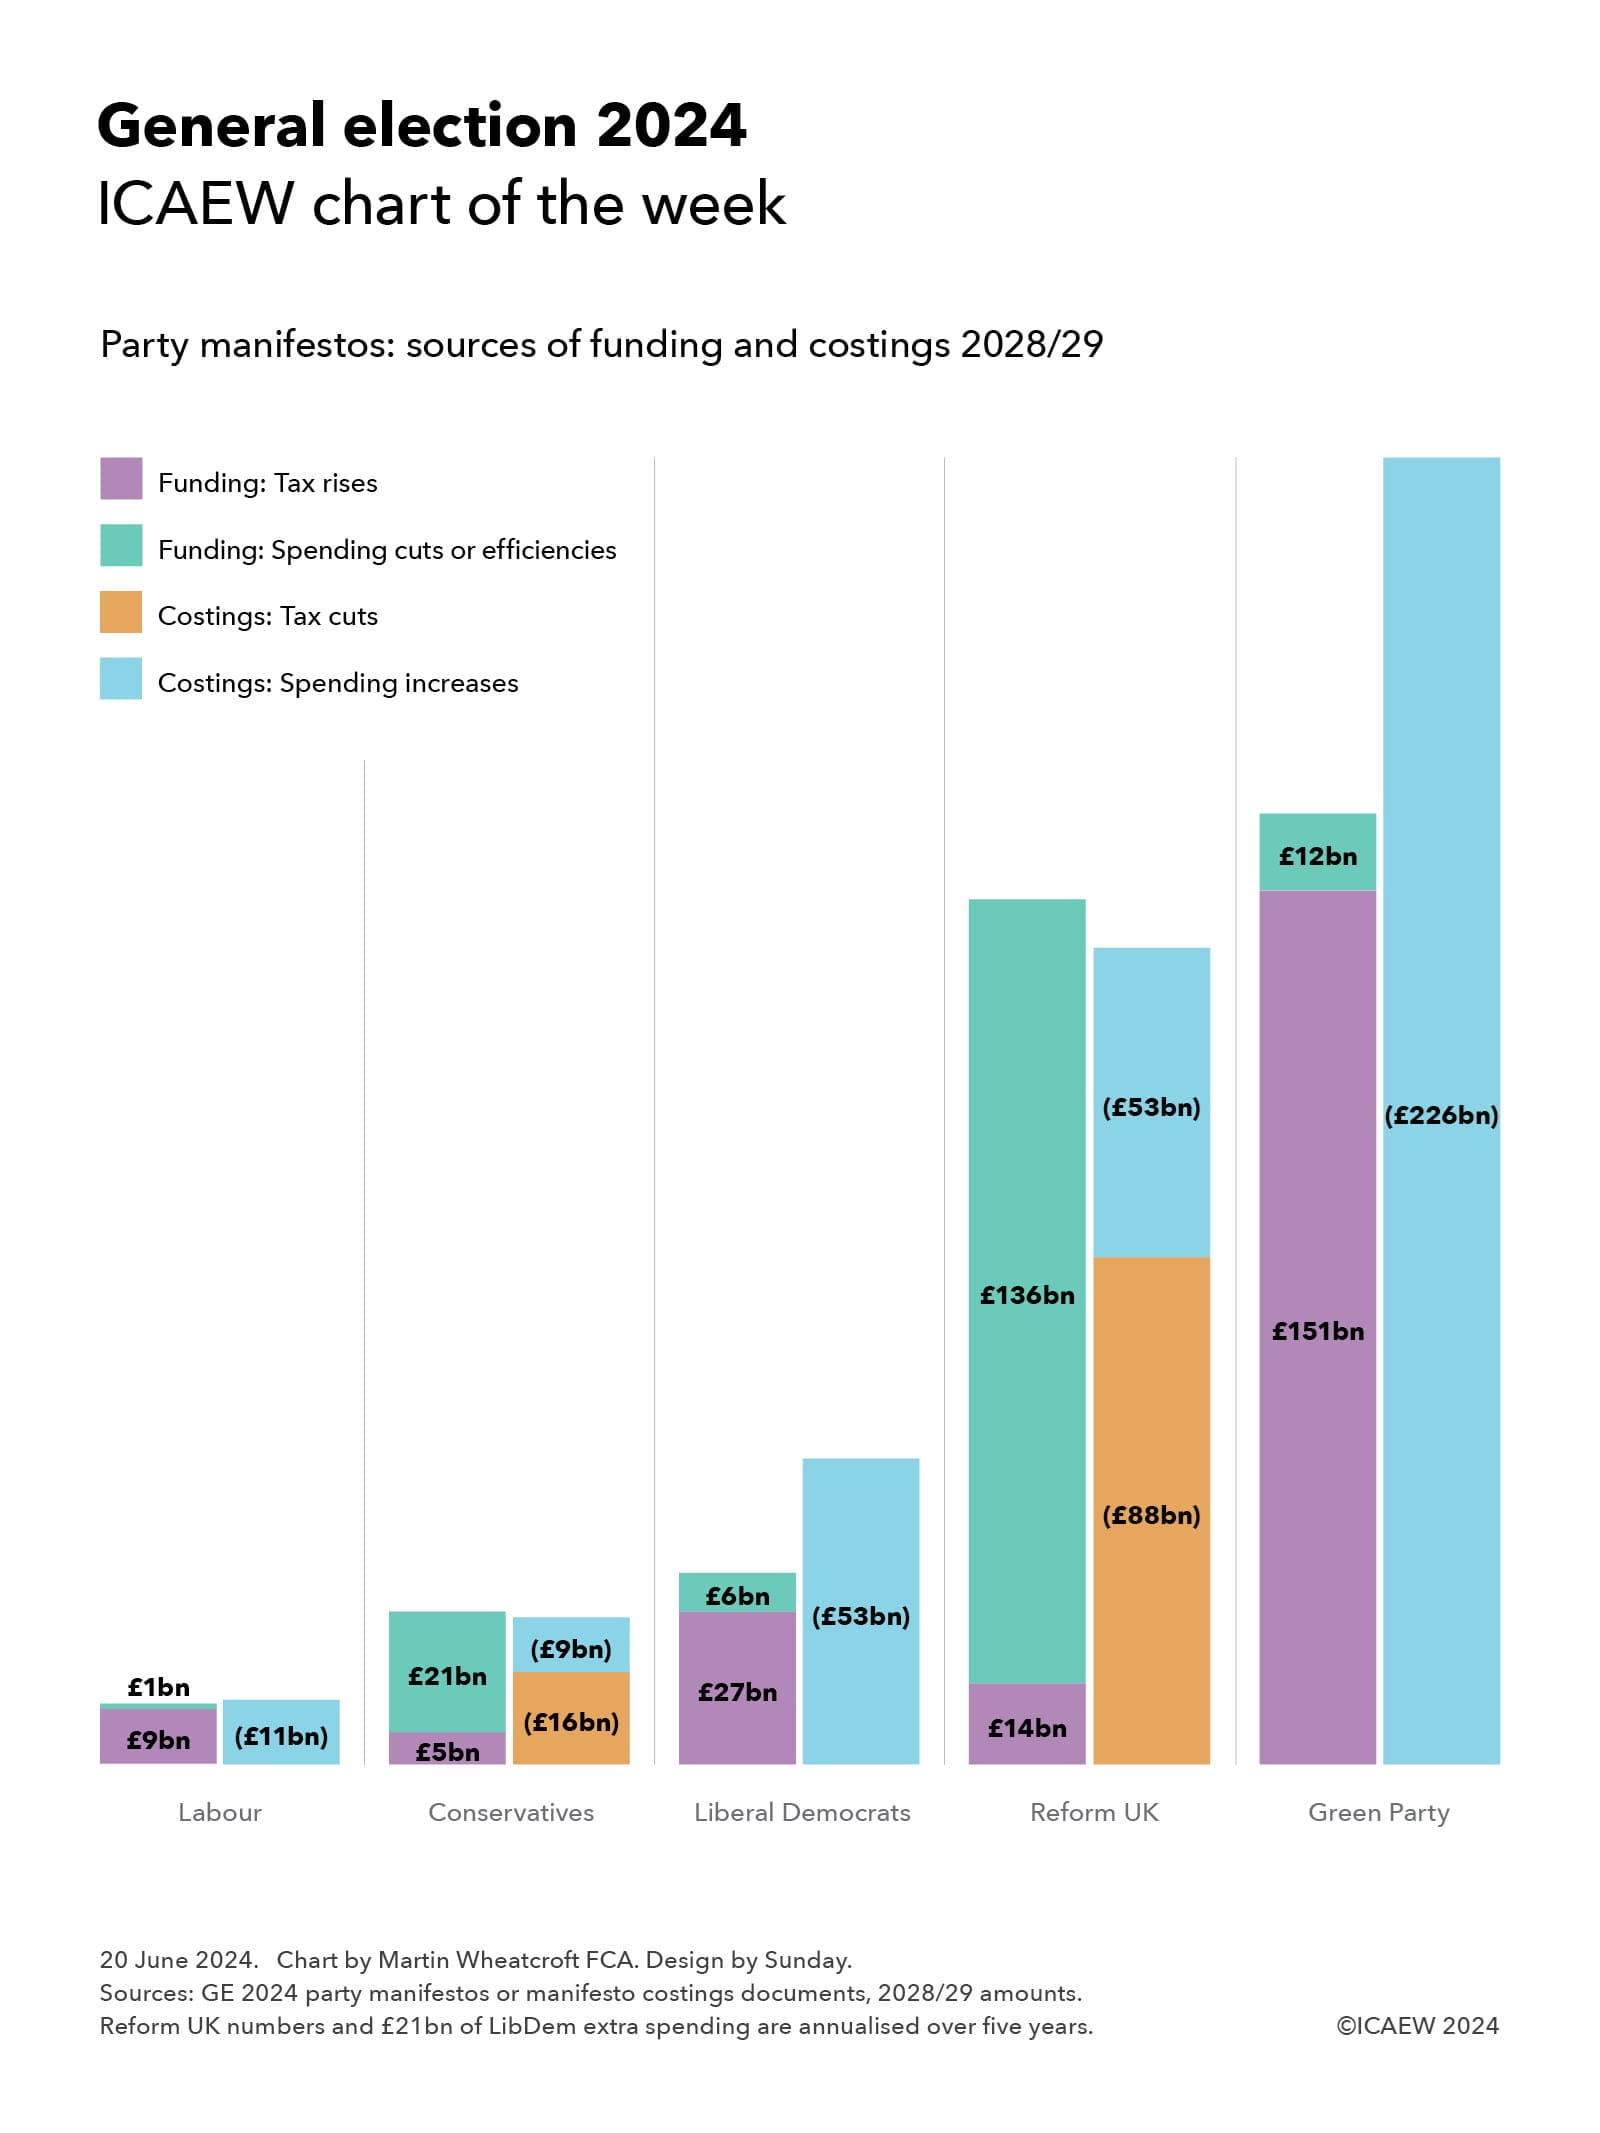 A summary of the financial commitments in the 2024 general election manifestos of the five UK-wide political parties.